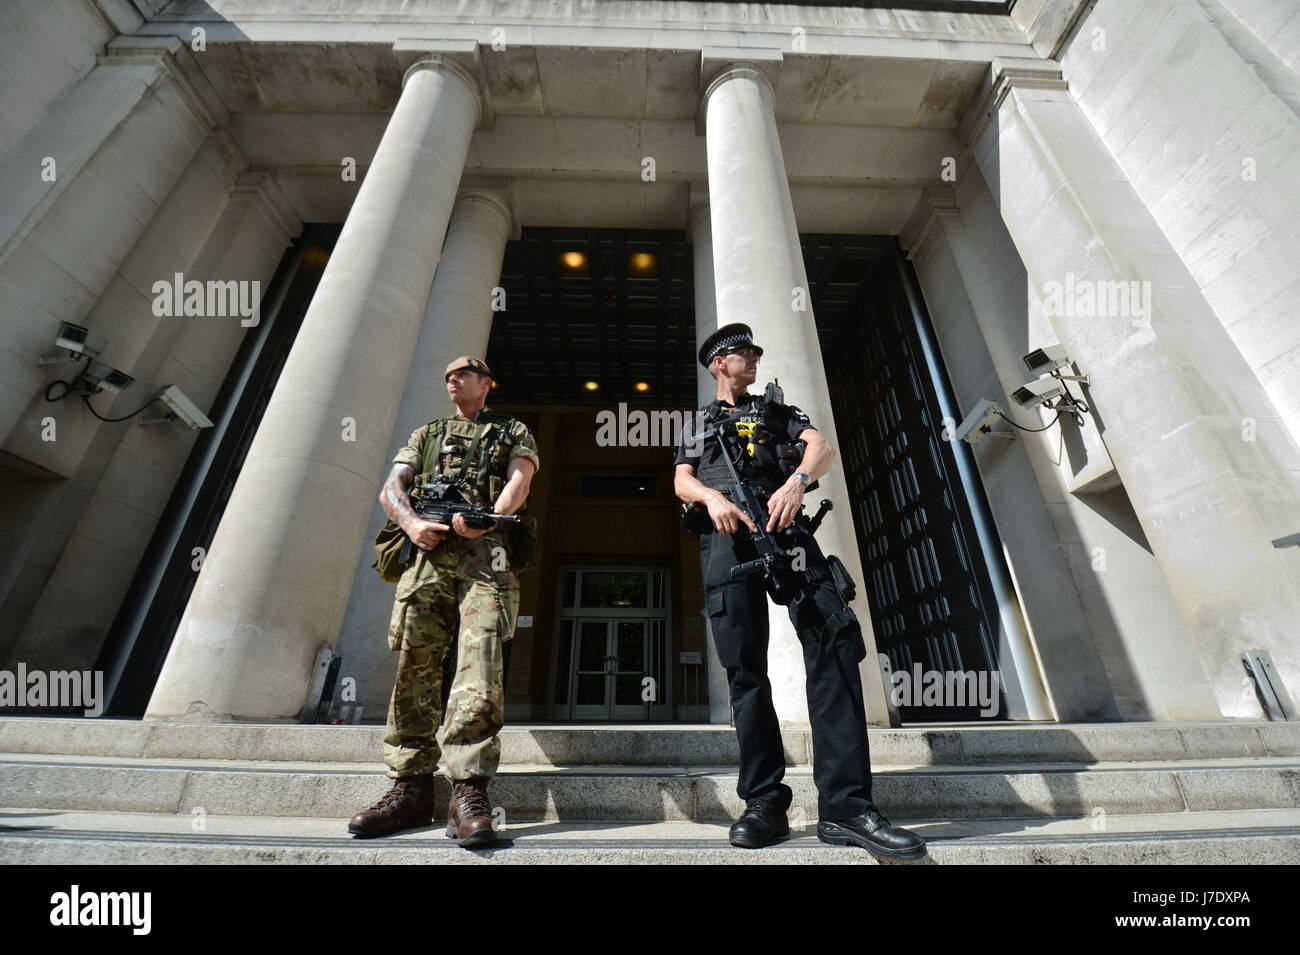 A soldier joins a police officer outside the Ministry of Defence, London, as armed troops have been deployed to guard 'key locations' under Operation Temperer, which is being enacted after security experts warned the Government that another terrorist attack could be imminent. Stock Photo